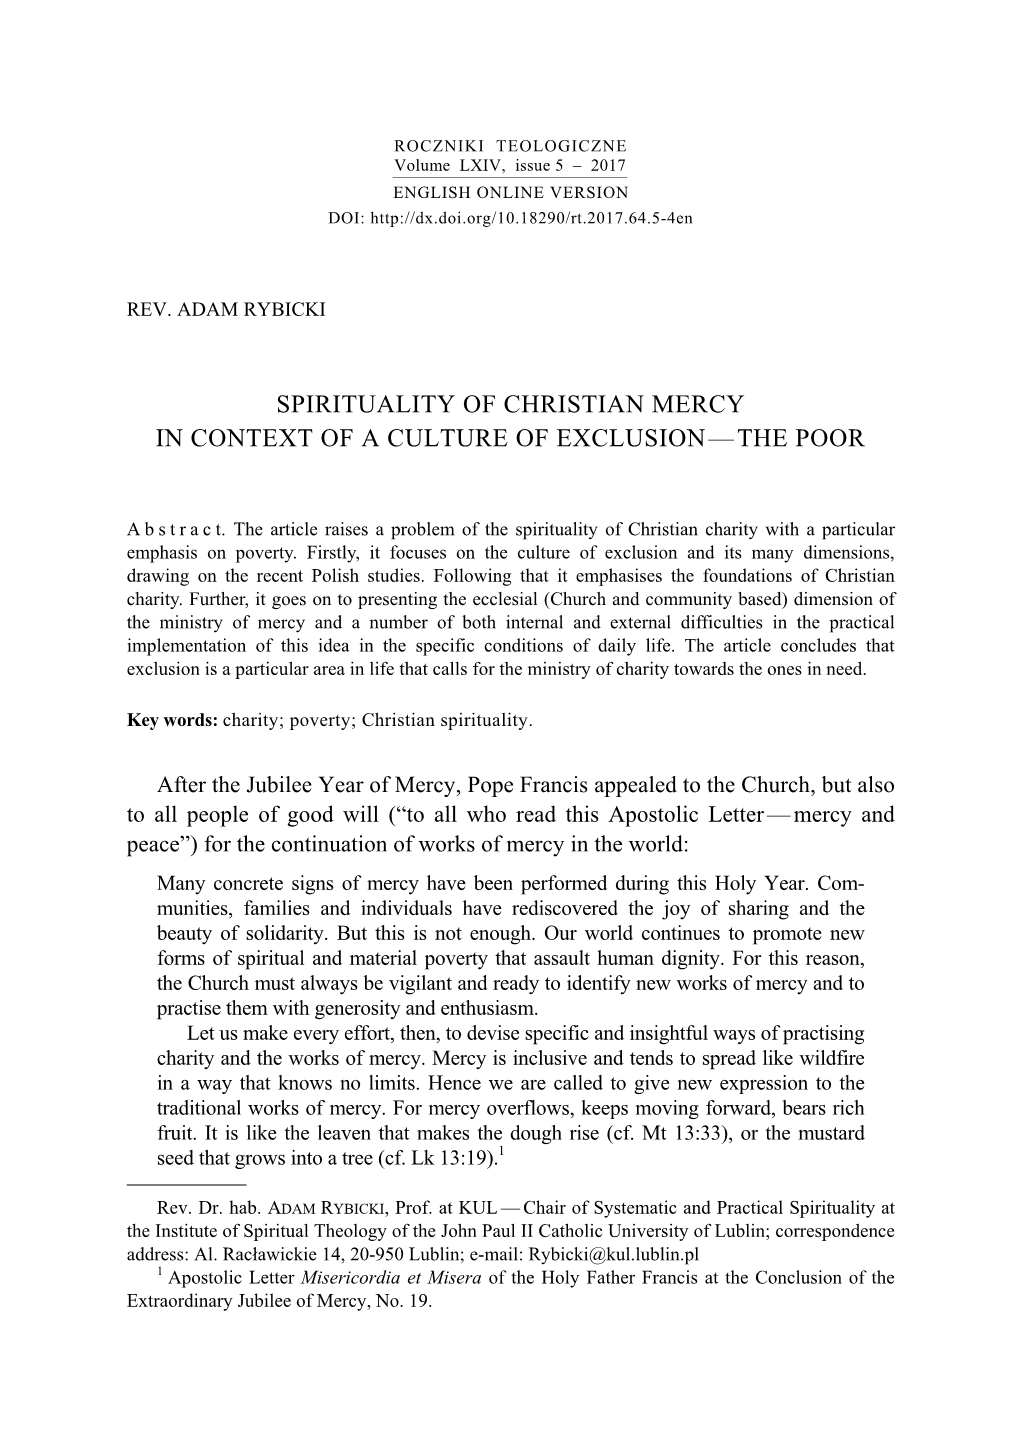 Spirituality of Christian Mercy in Context of a Culture of Exclusion—The Poor